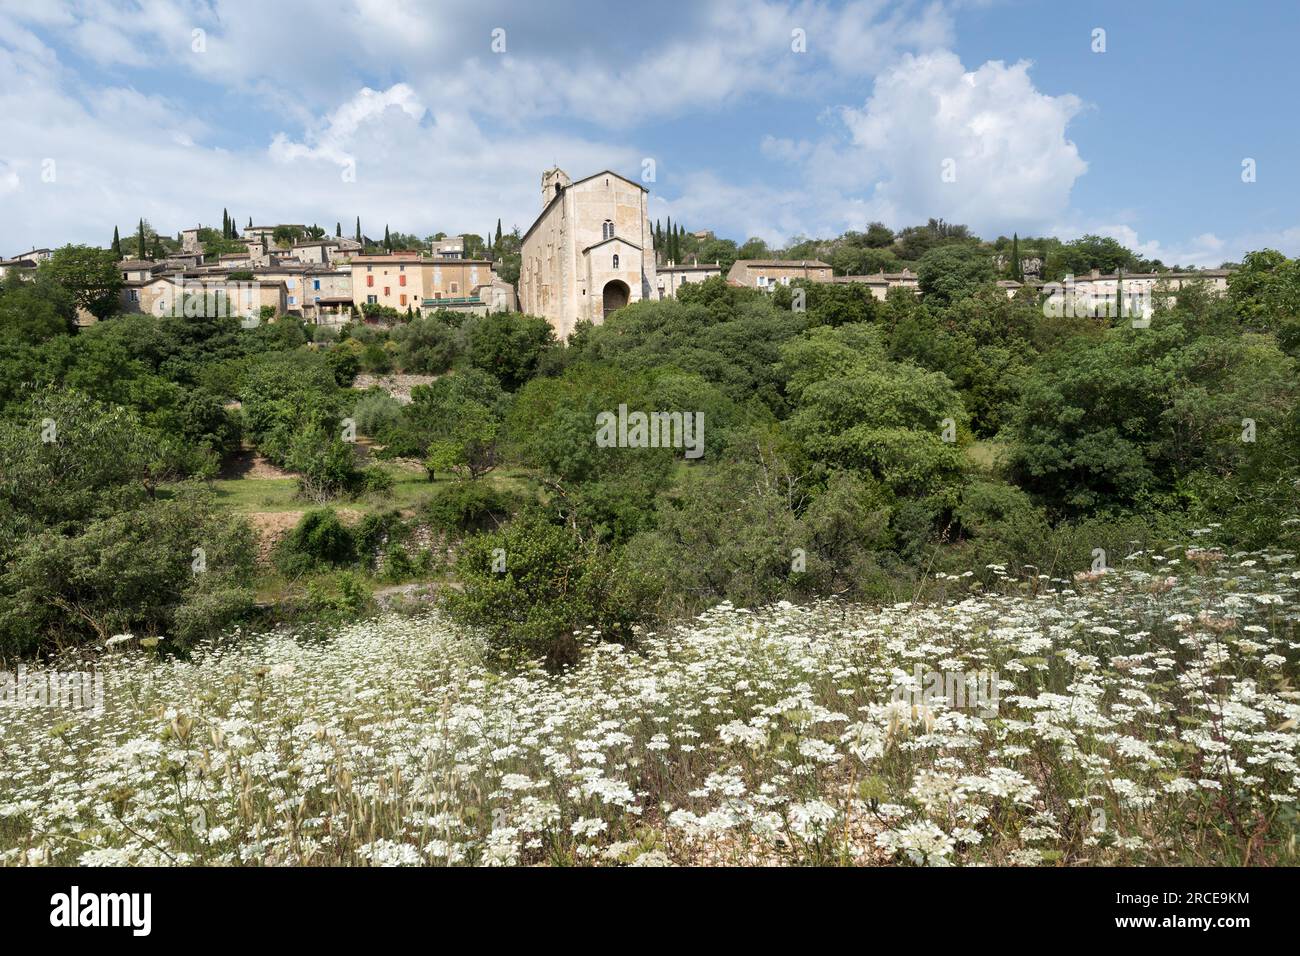 The Village of Lagorce viewed across a field of French Cow Parsley (Orlaya grandiflora), also known as White Laceflower, Ardeche, France Stock Photo